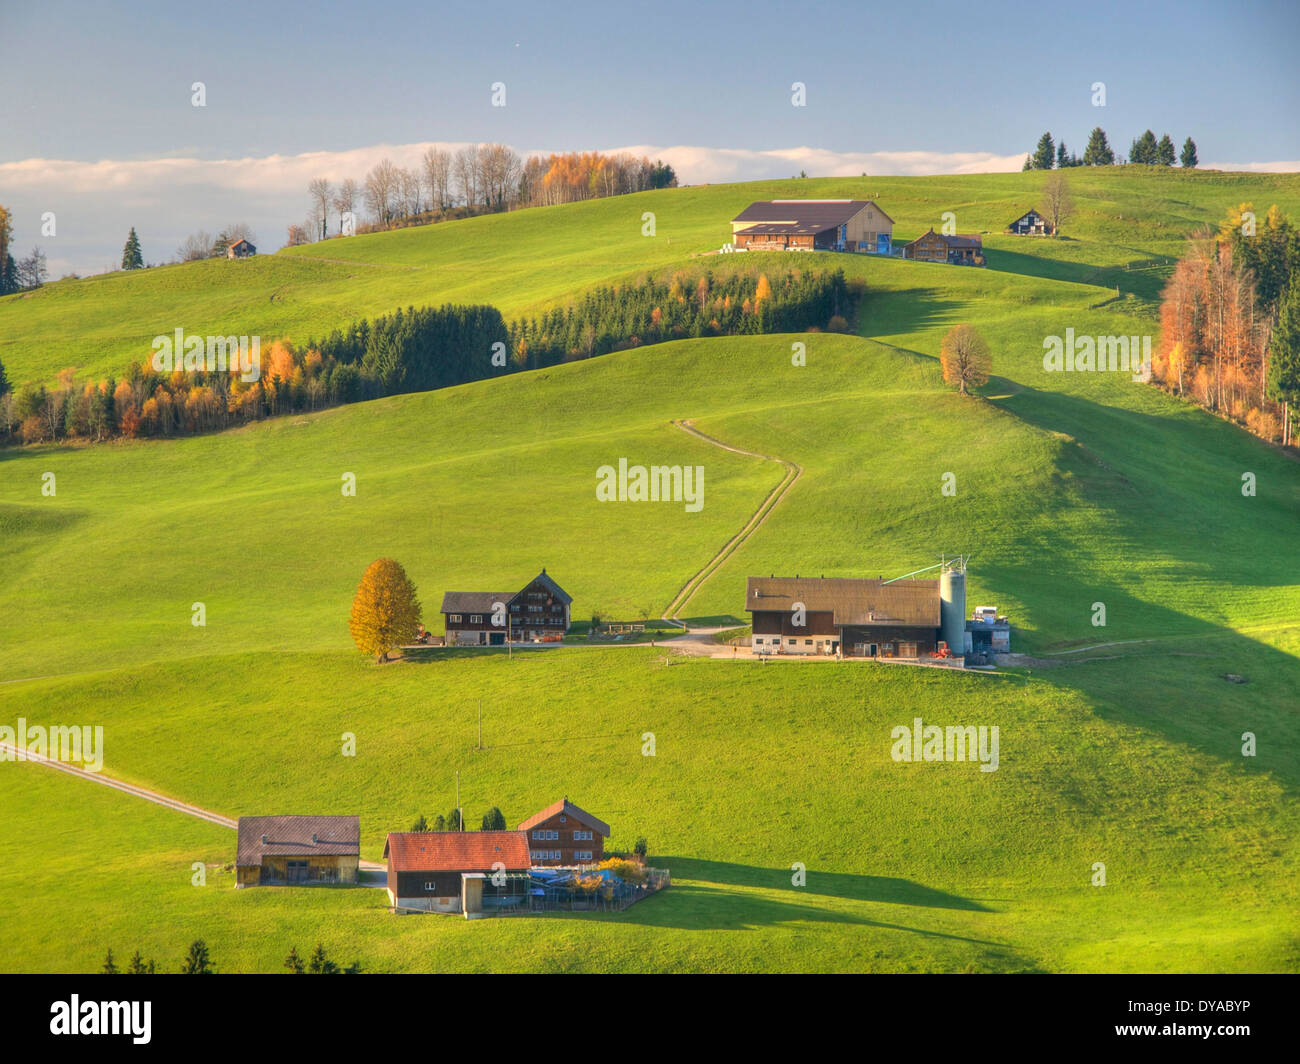 Appenzell, Switzerland, Europe, farms, trees, colorful, autumn, scenery, landscape, idyllic, meadows, agriculture Stock Photo